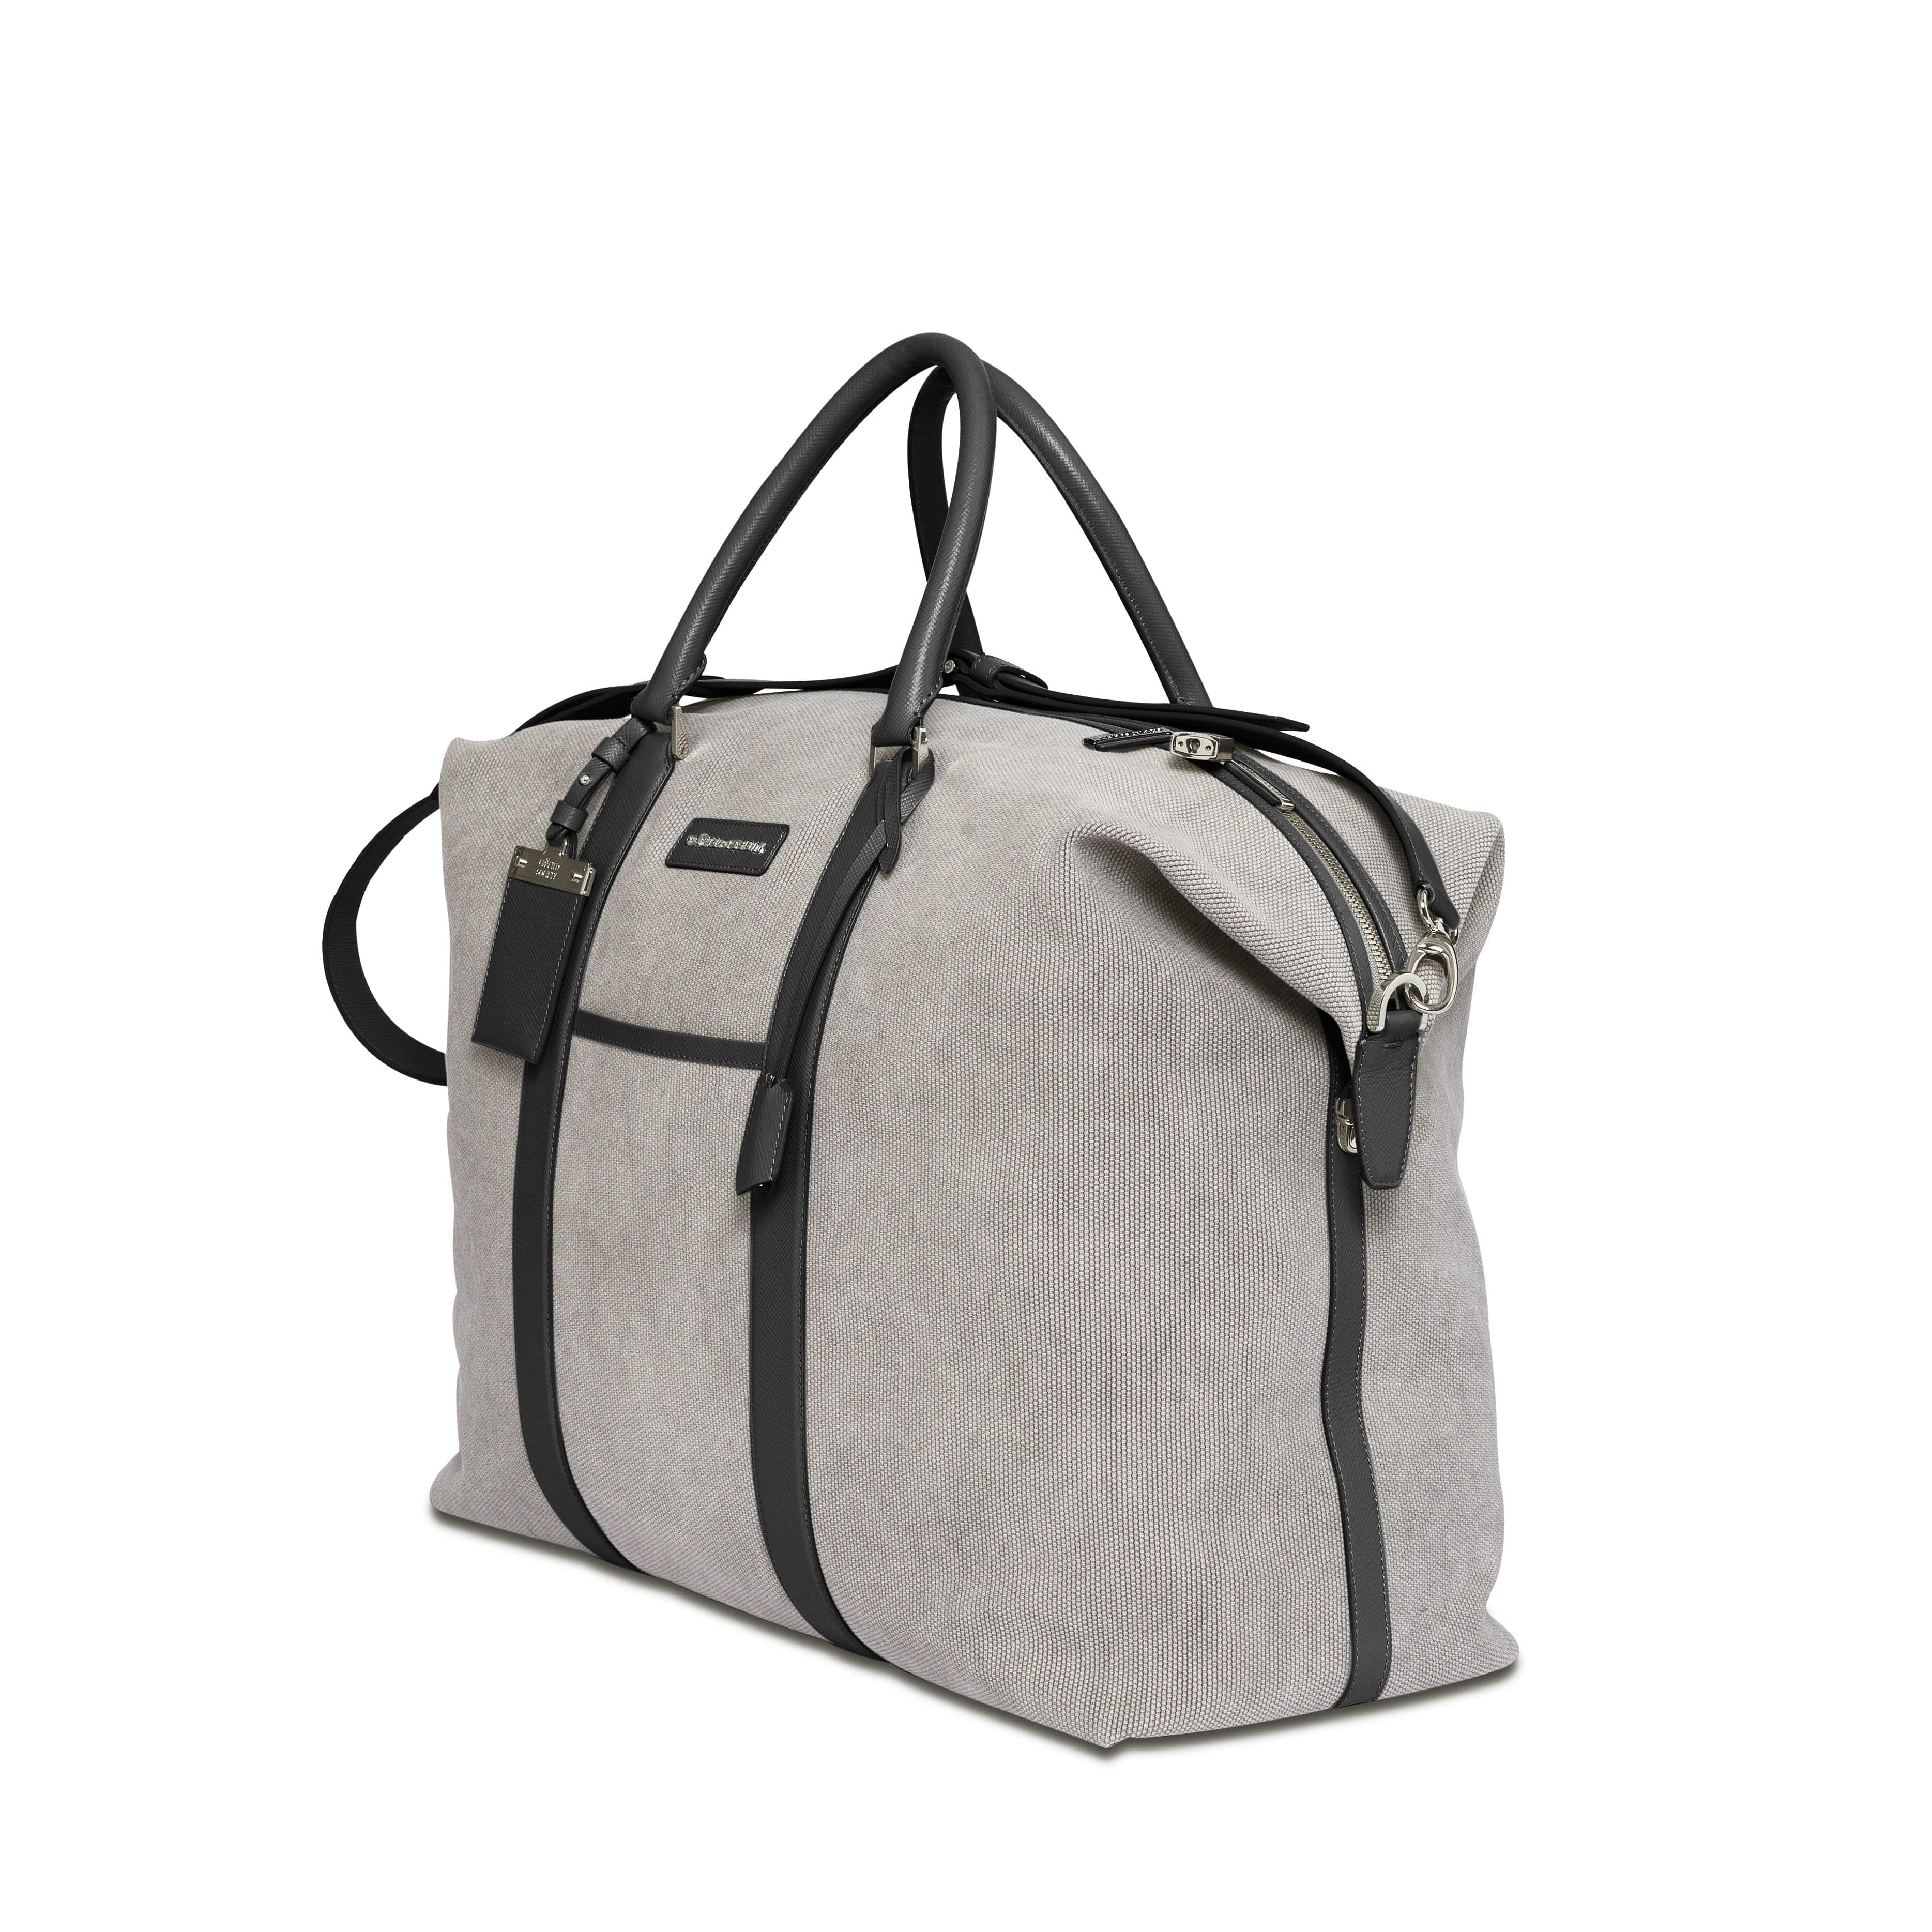 Nando Leather Weekender Bag Small - Light Grey Canvas & Black Saffiano Leather